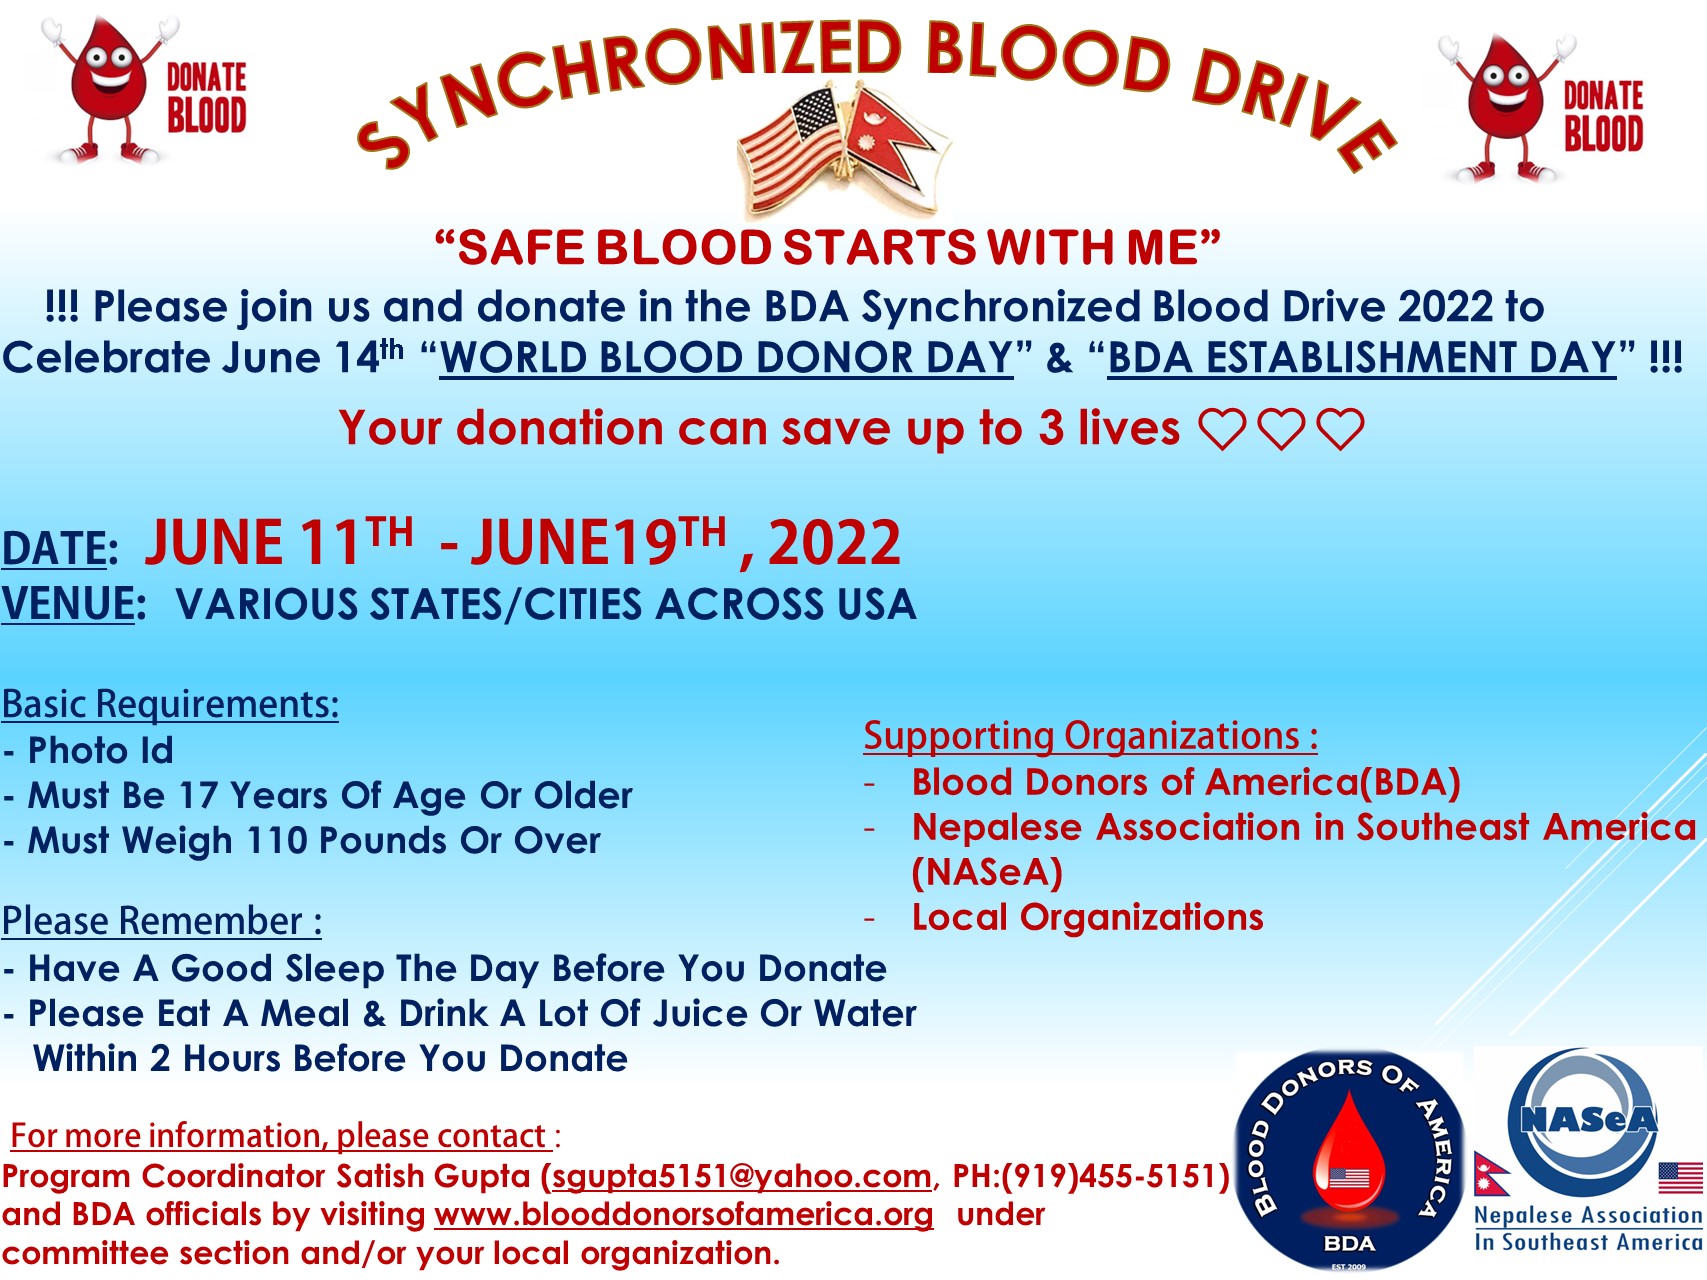 Synchronized Blood Drive - June 14 2022